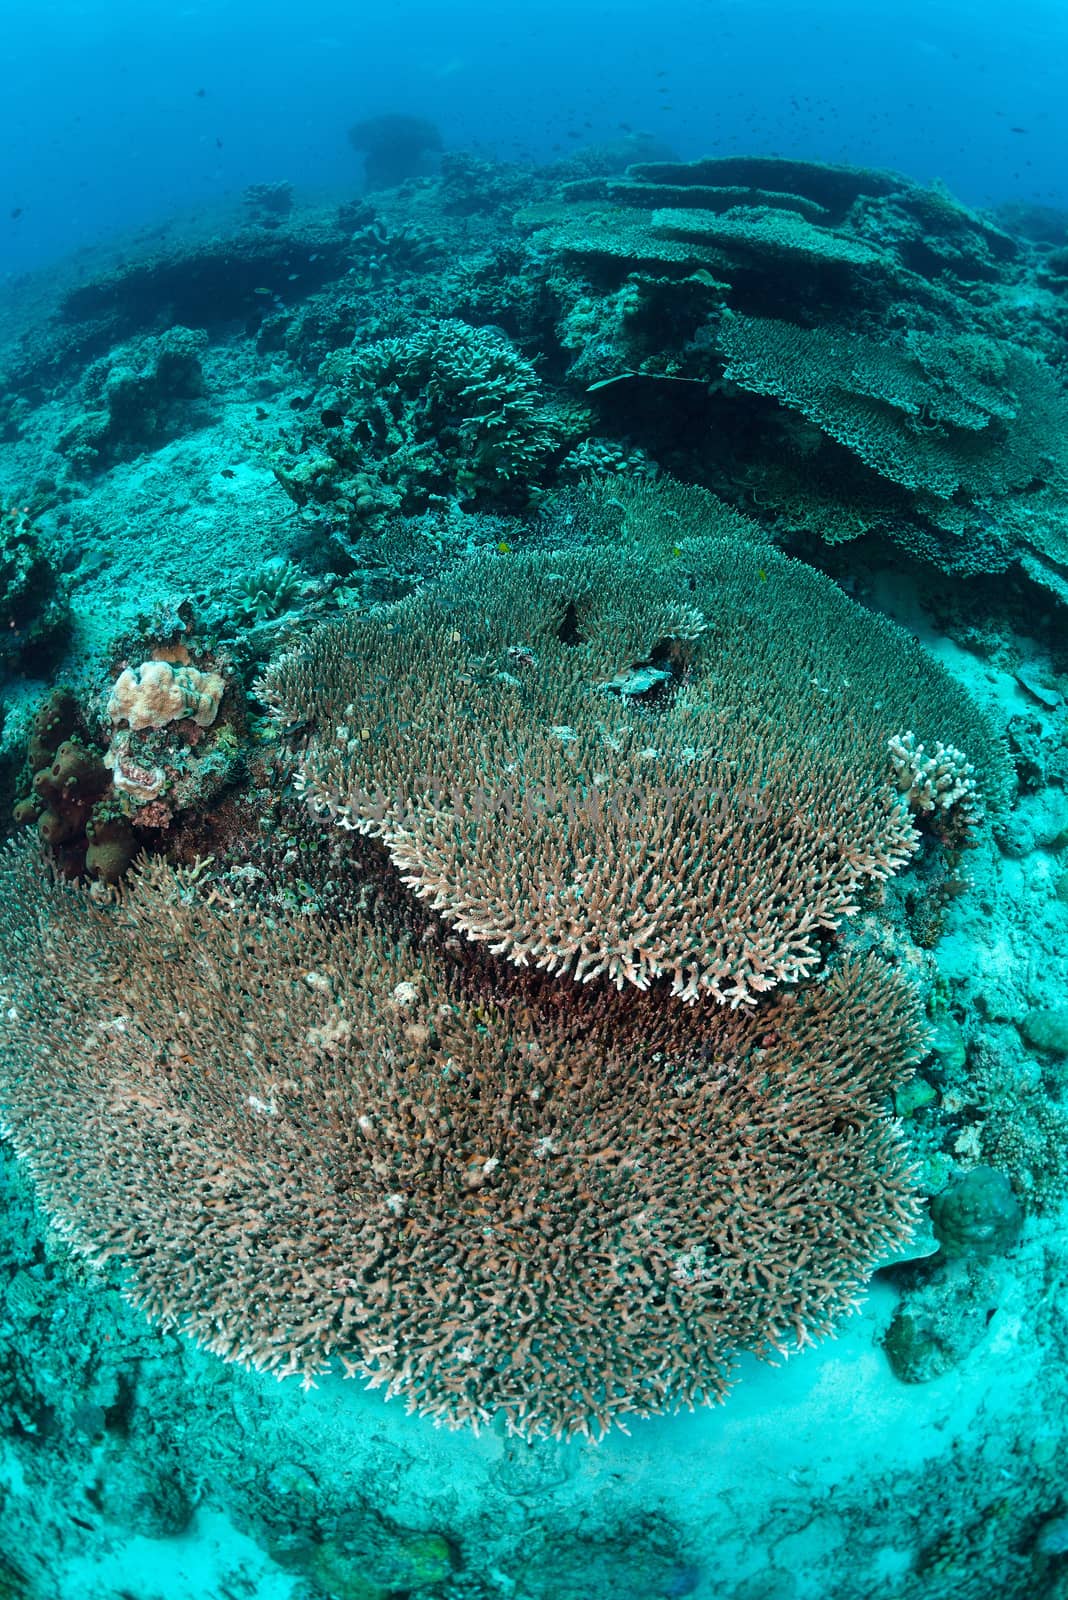 Underwater staghorn table coral in Sipadan, Malaysia by think4photop